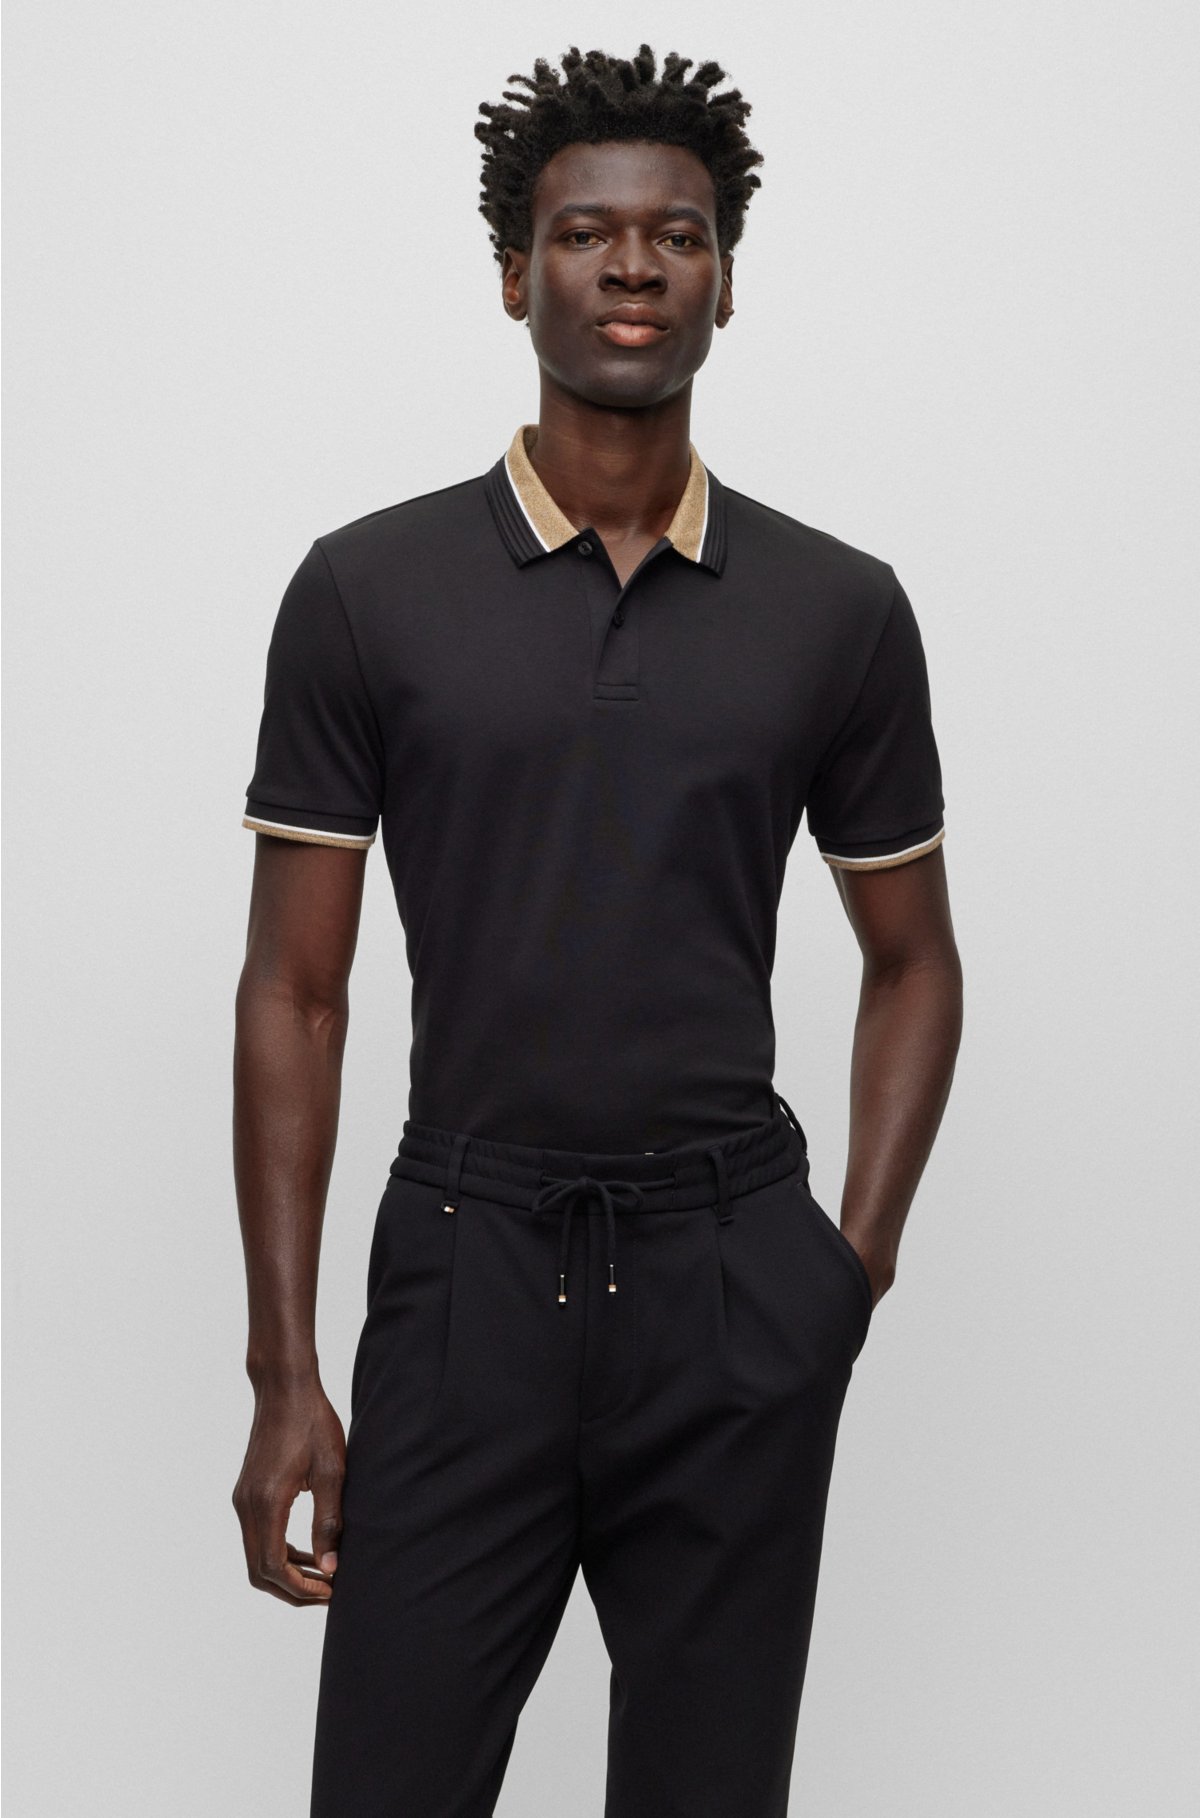 BOSS - Mercerized-cotton polo shirt with contrast tipping